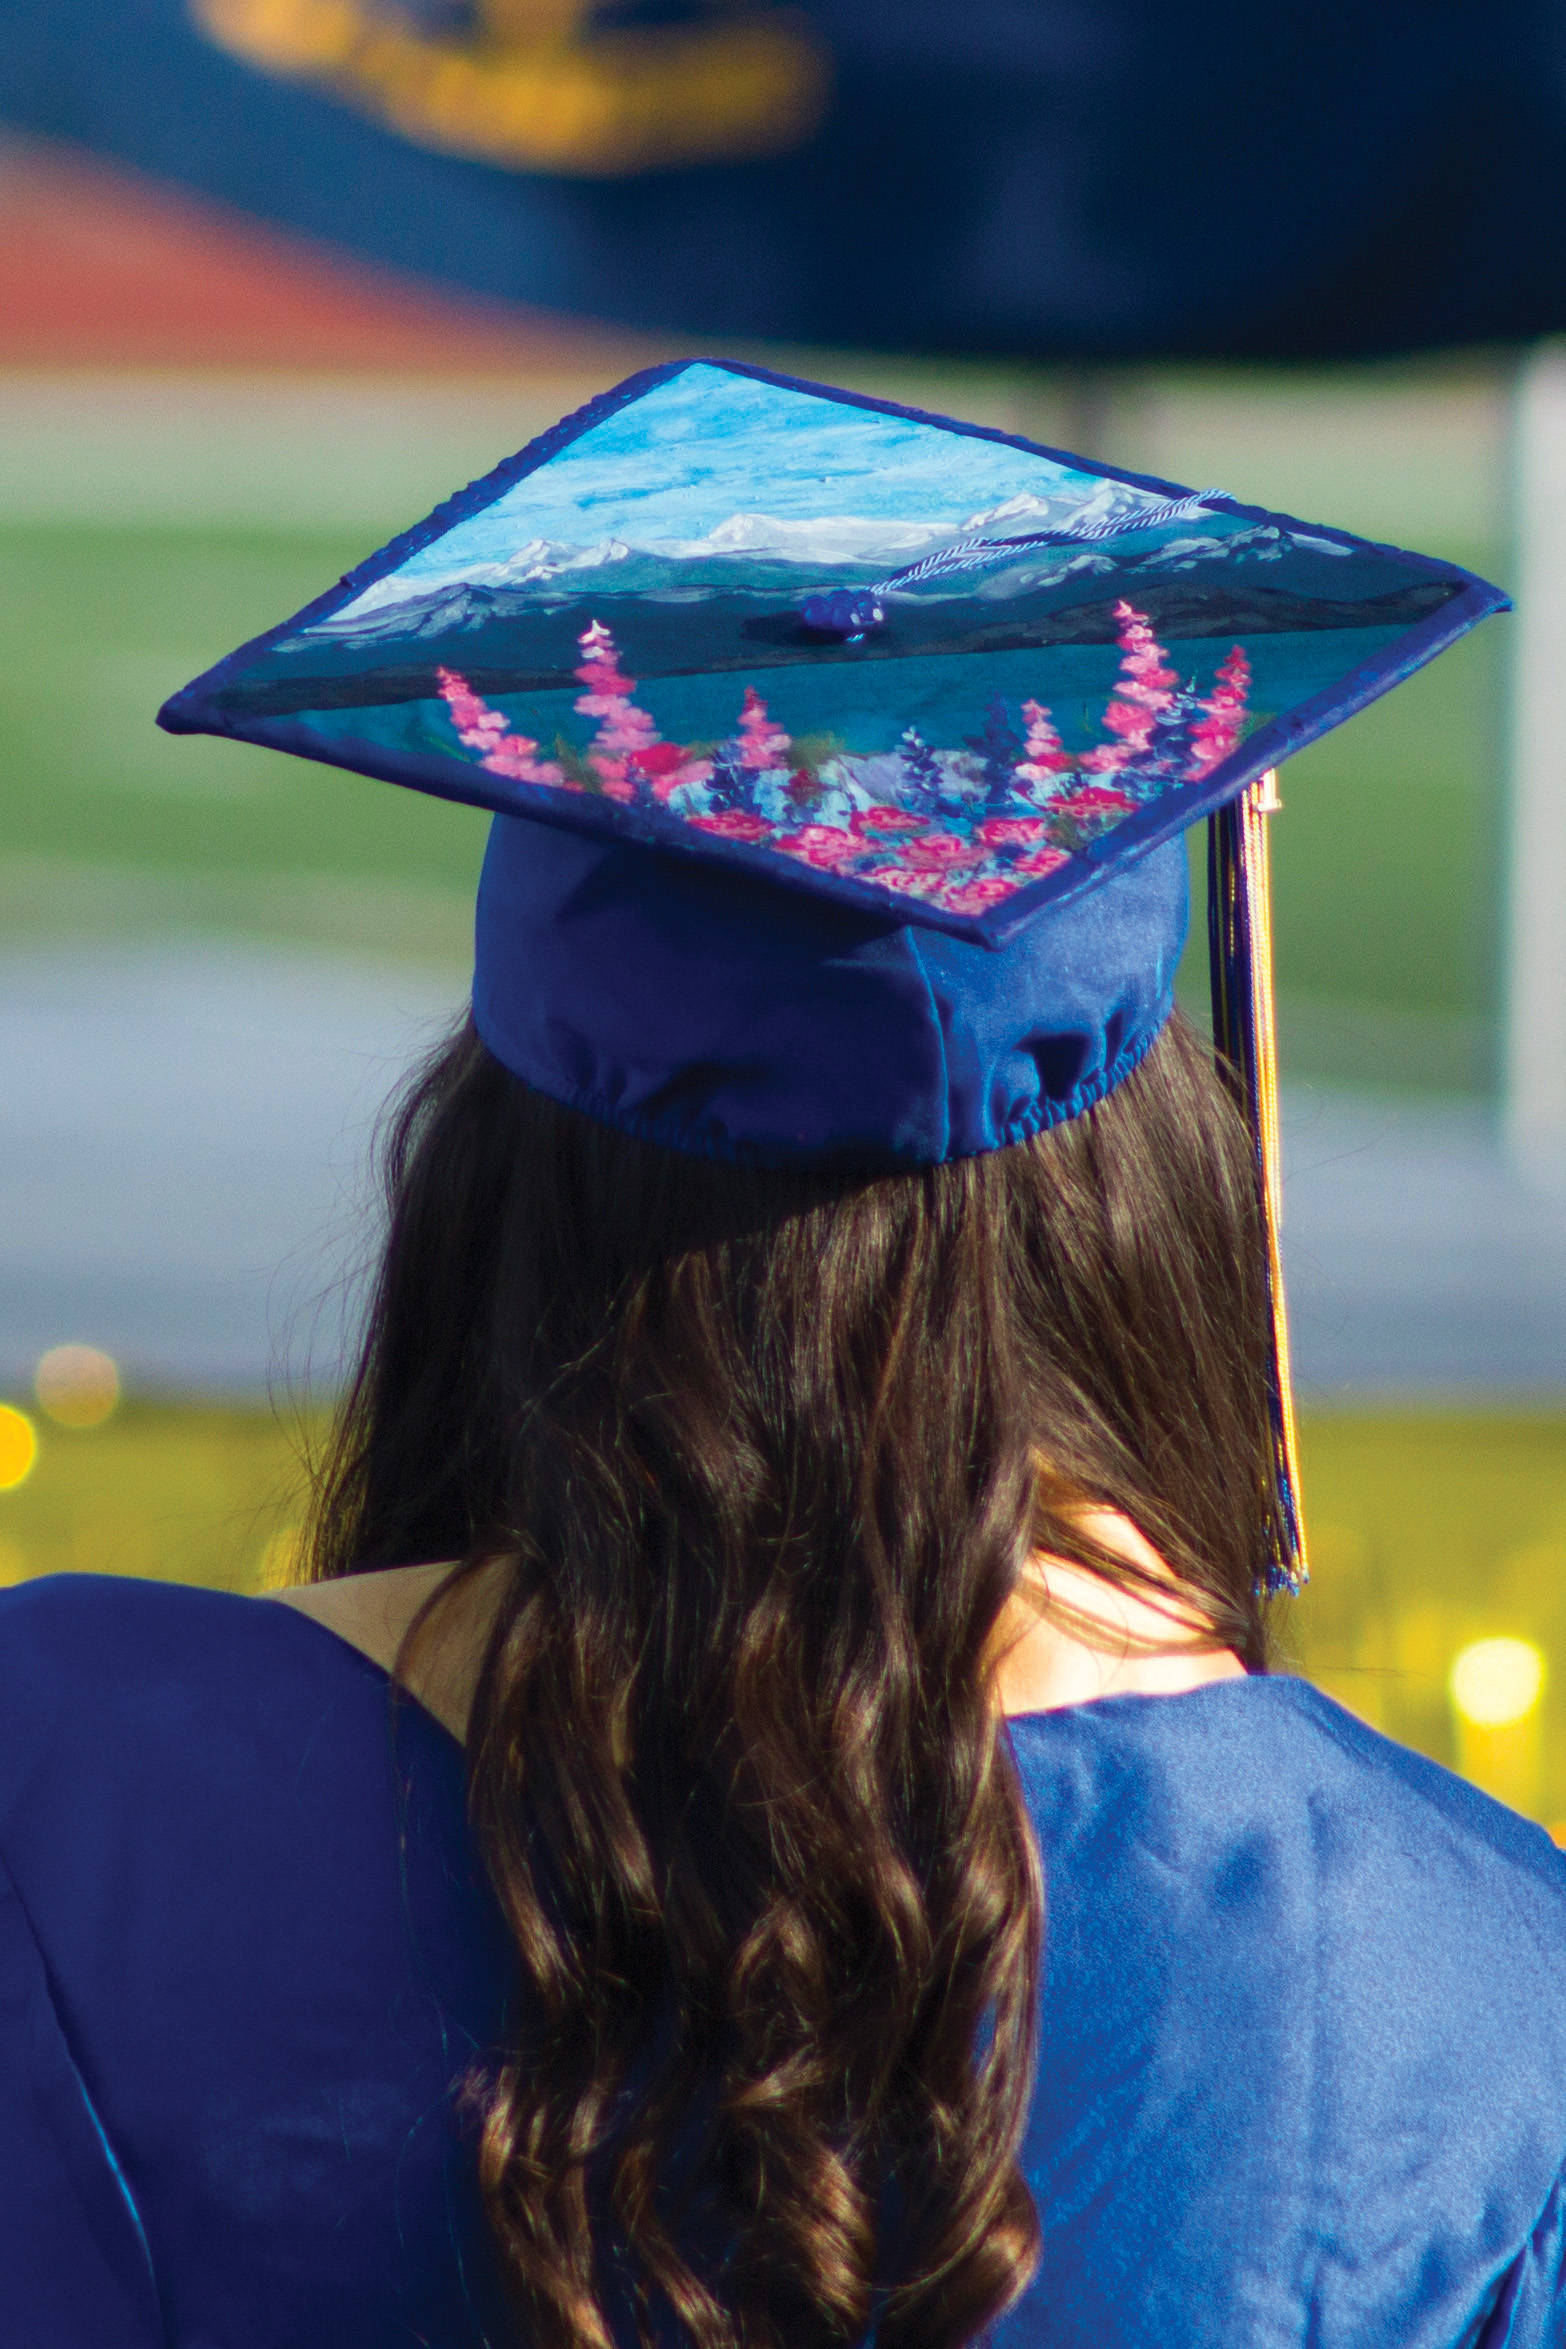 Photo by Sarah Knapp/Homer News 
A Homer High School graduate dons her graduation cap featuring Alaska scenery, including fireweed and the bay.